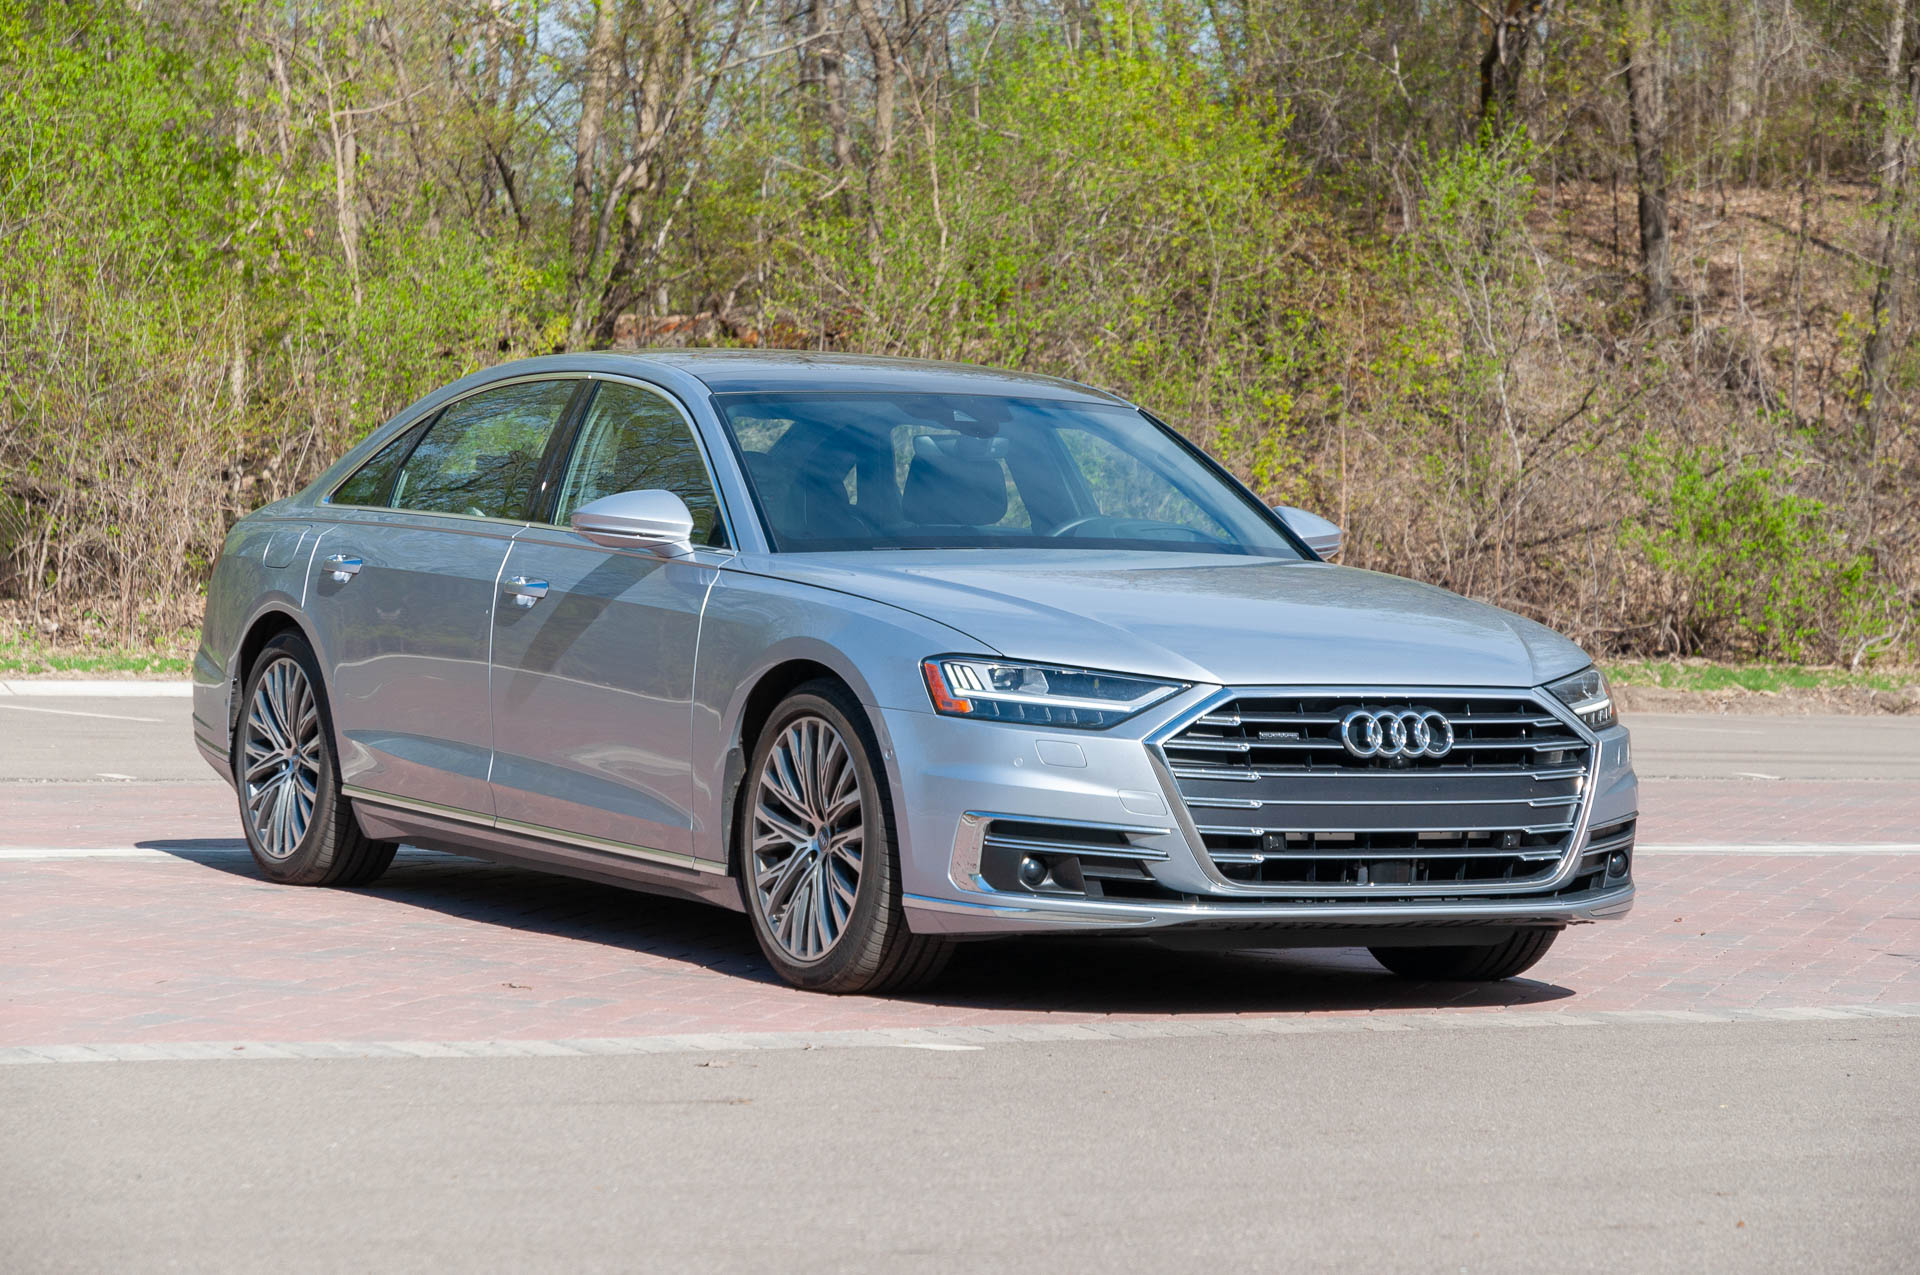 Review update: The 2019 Audi A8 L is the understated way to arrive